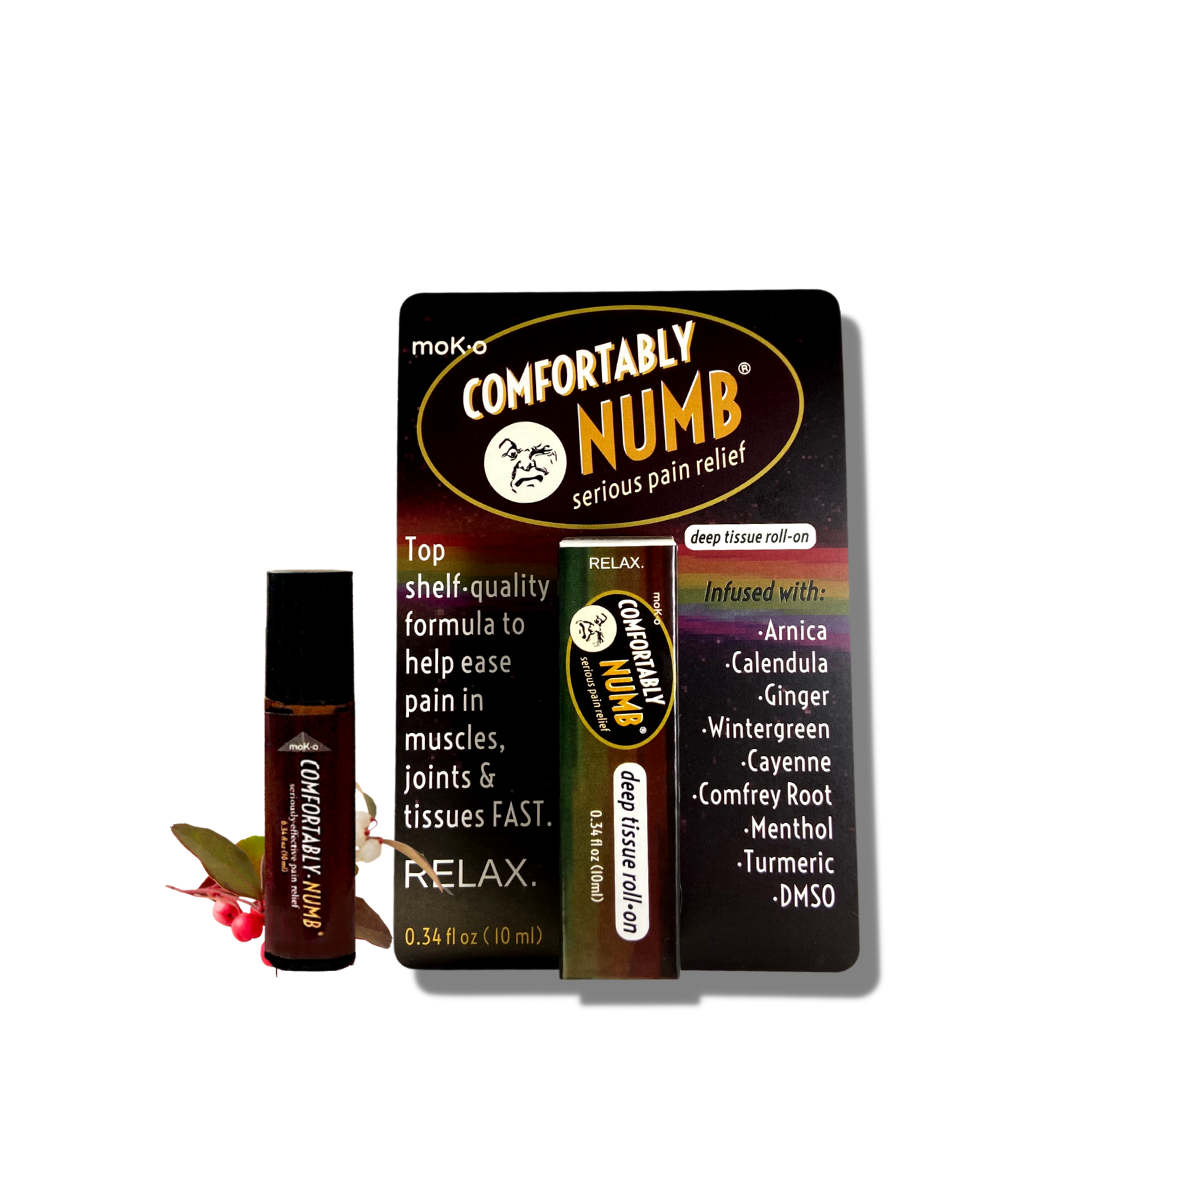 Comfortably Numb® has ultra-cool packaging with a vintage rock and roll feel...hence the Comfortably Numb name.  Looking for a gift for someone who has everything - including pain, this unique packaging and effective product will be your recipient's favorite gift. 